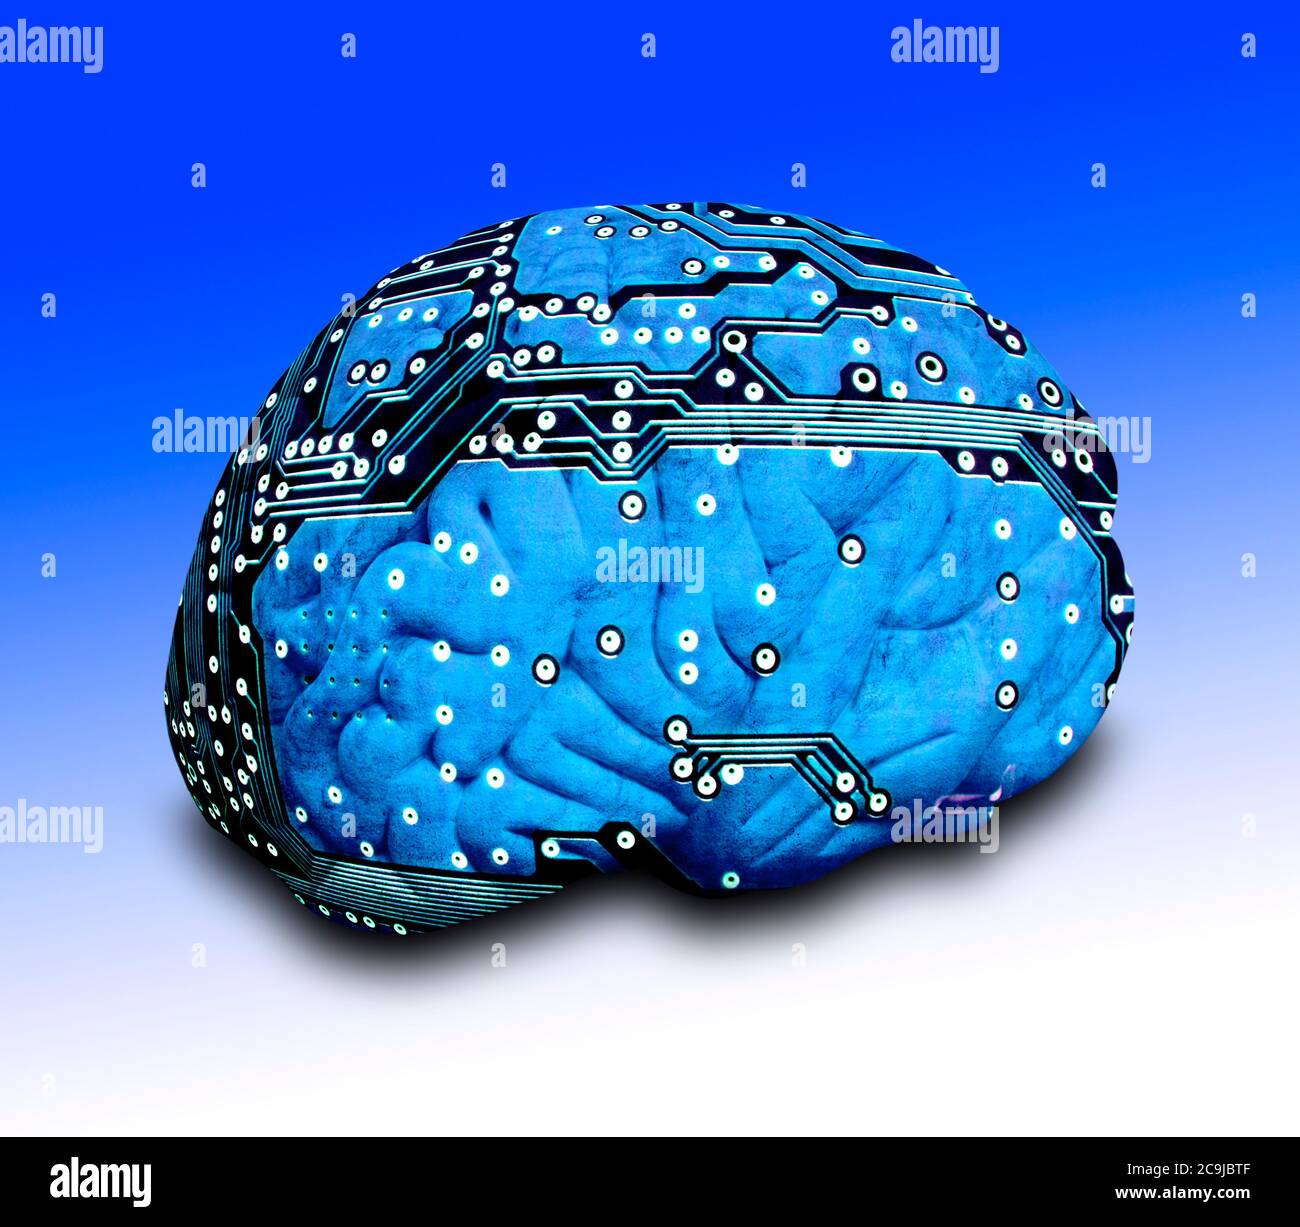 Human brain with circuit board against plain background. Stock Photo